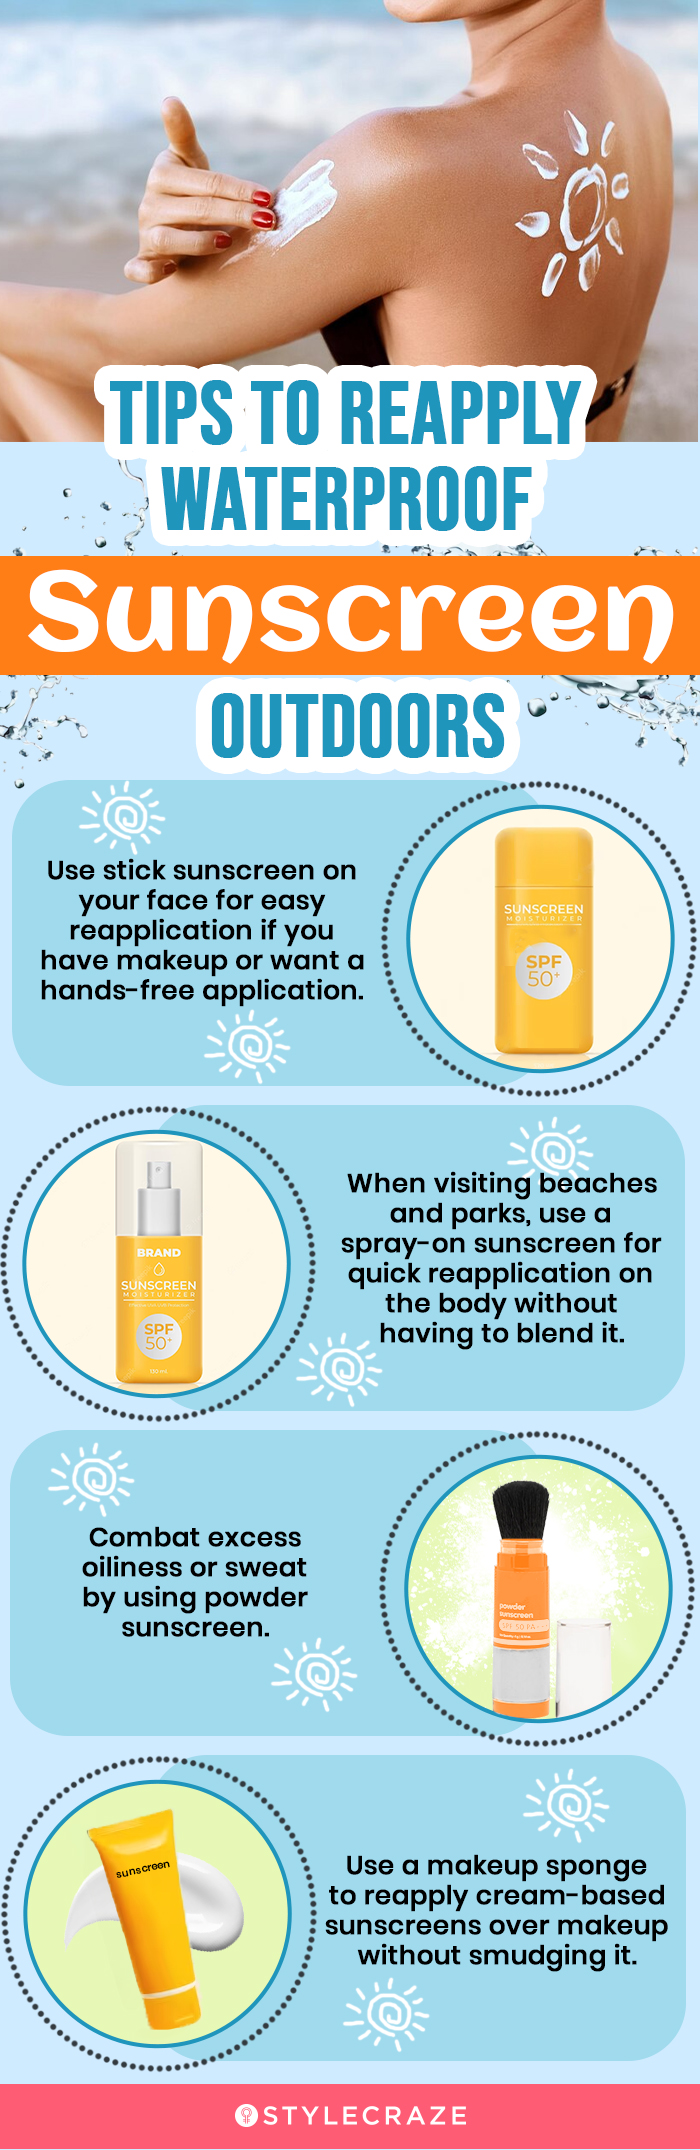 Tips To Reapply Waterproof Sunscreen Outdoors (infographic)